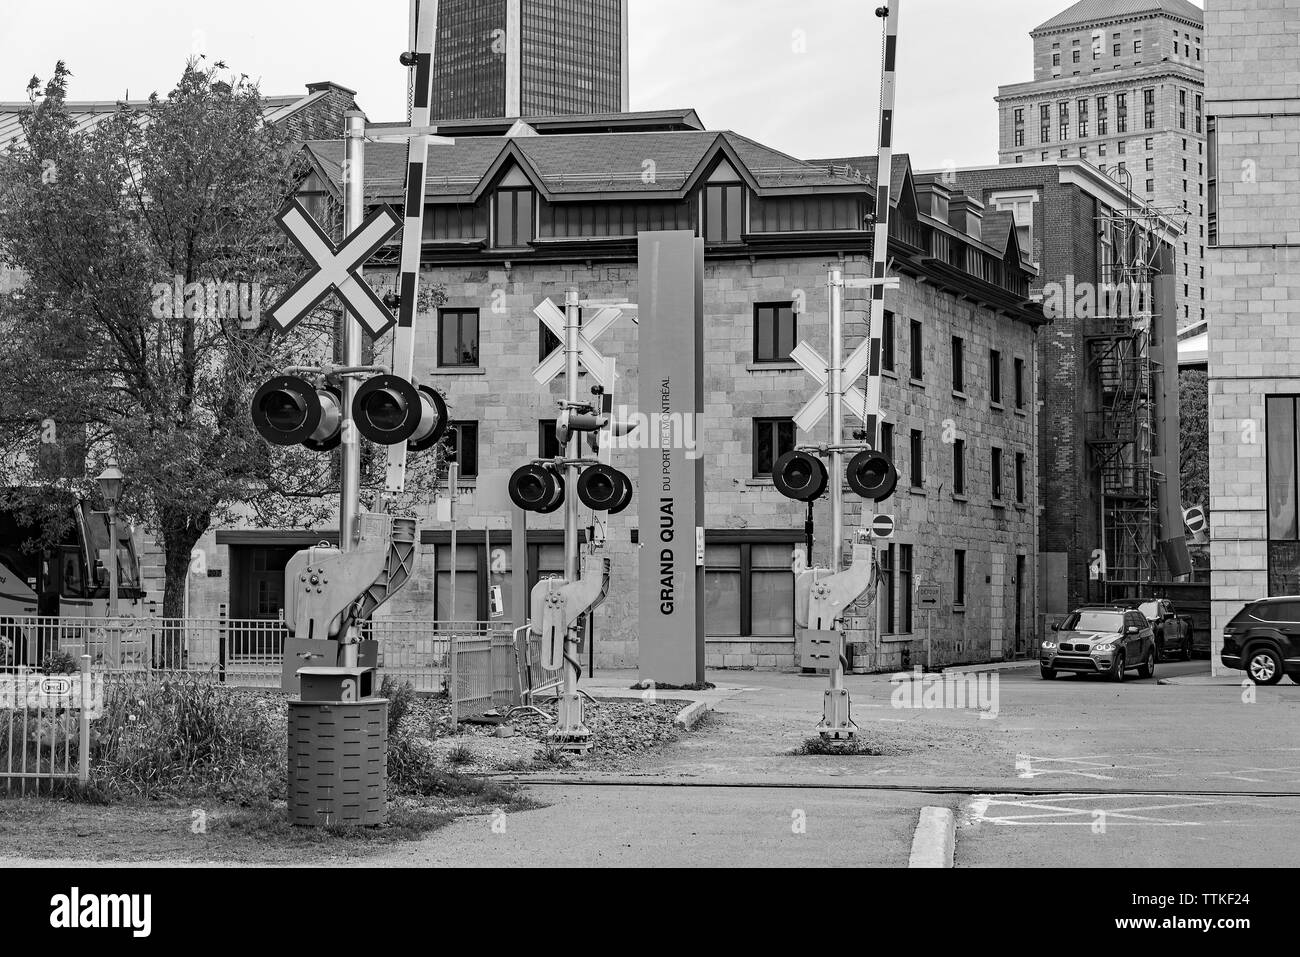 Railway crossing in Old Montreal, Canada Stock Photo